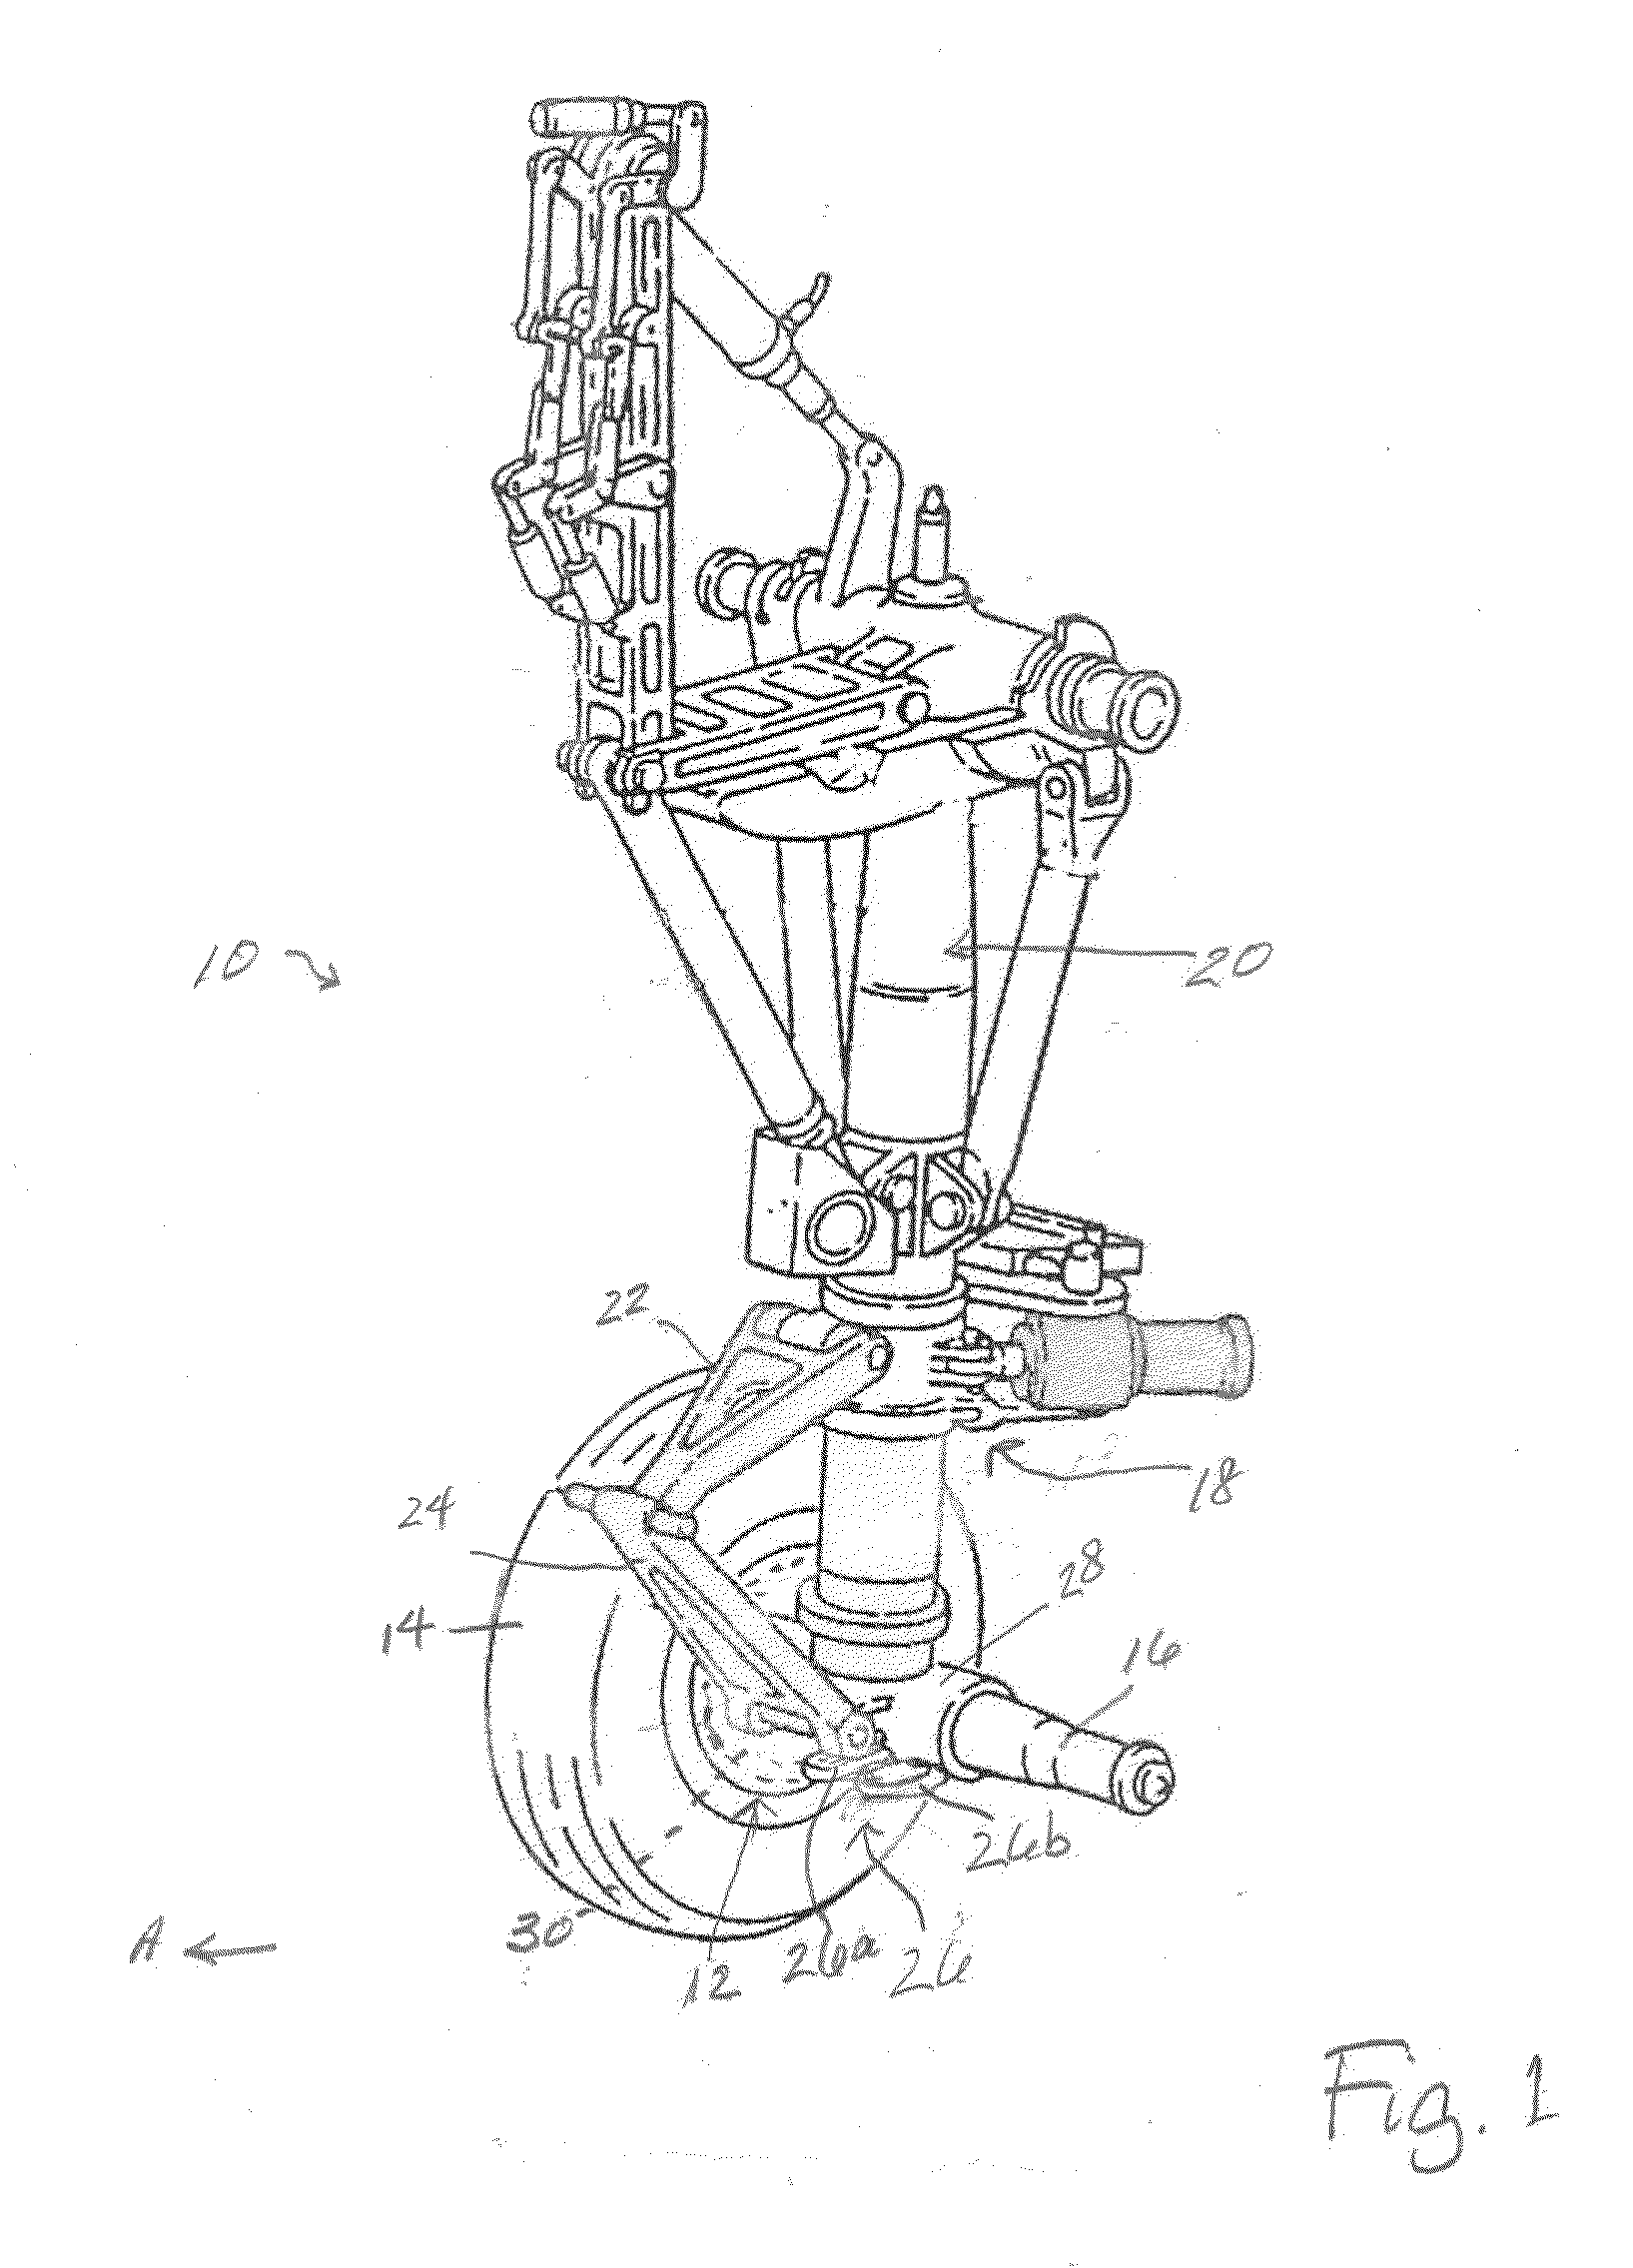 Load Transfer in a Powered Aircraft Drive Wheel